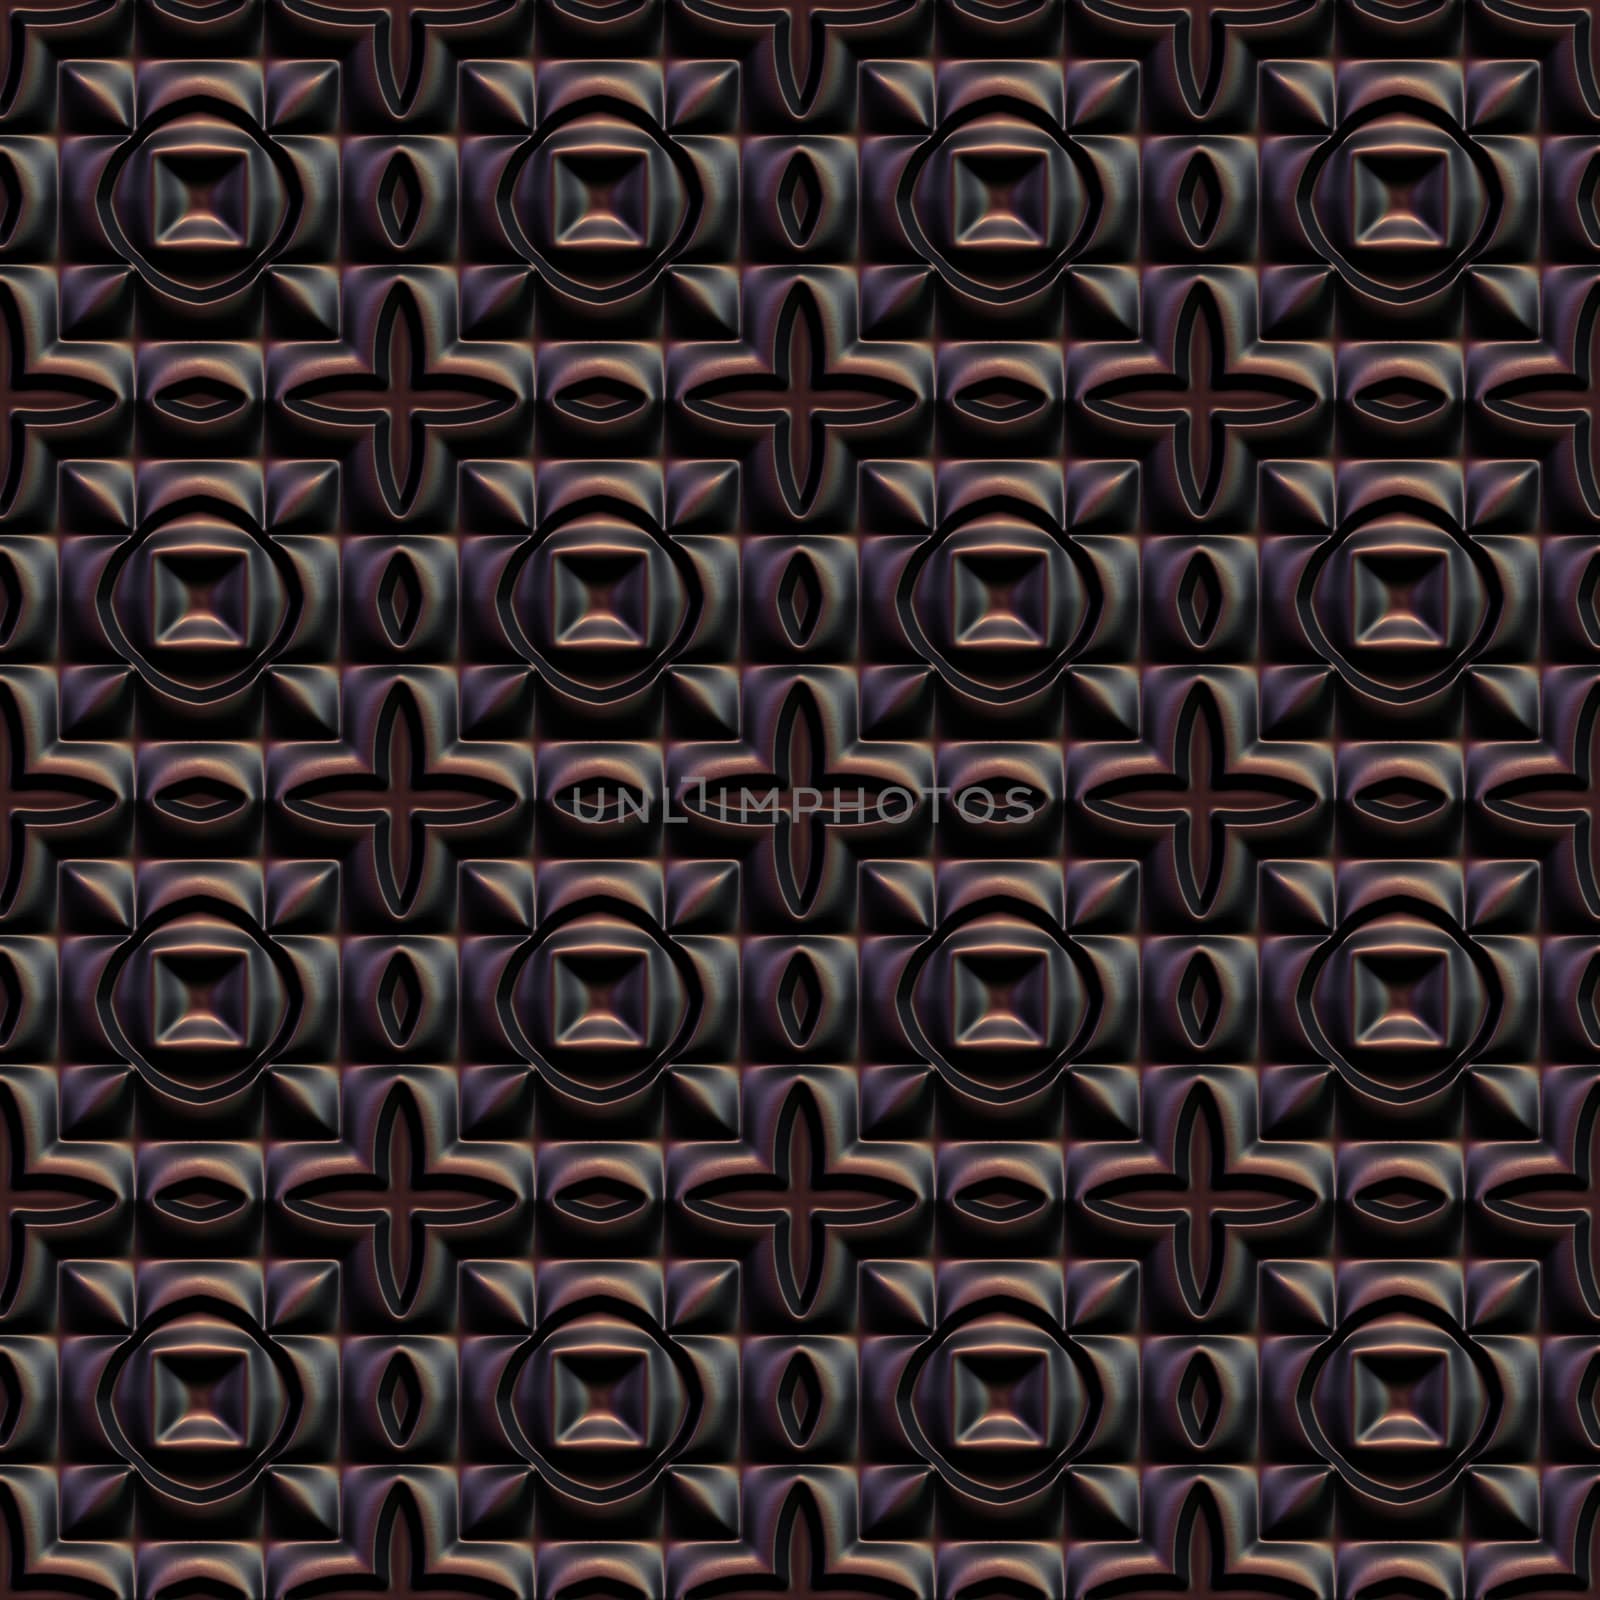 Brown leather seamless tileable decorative background pattern